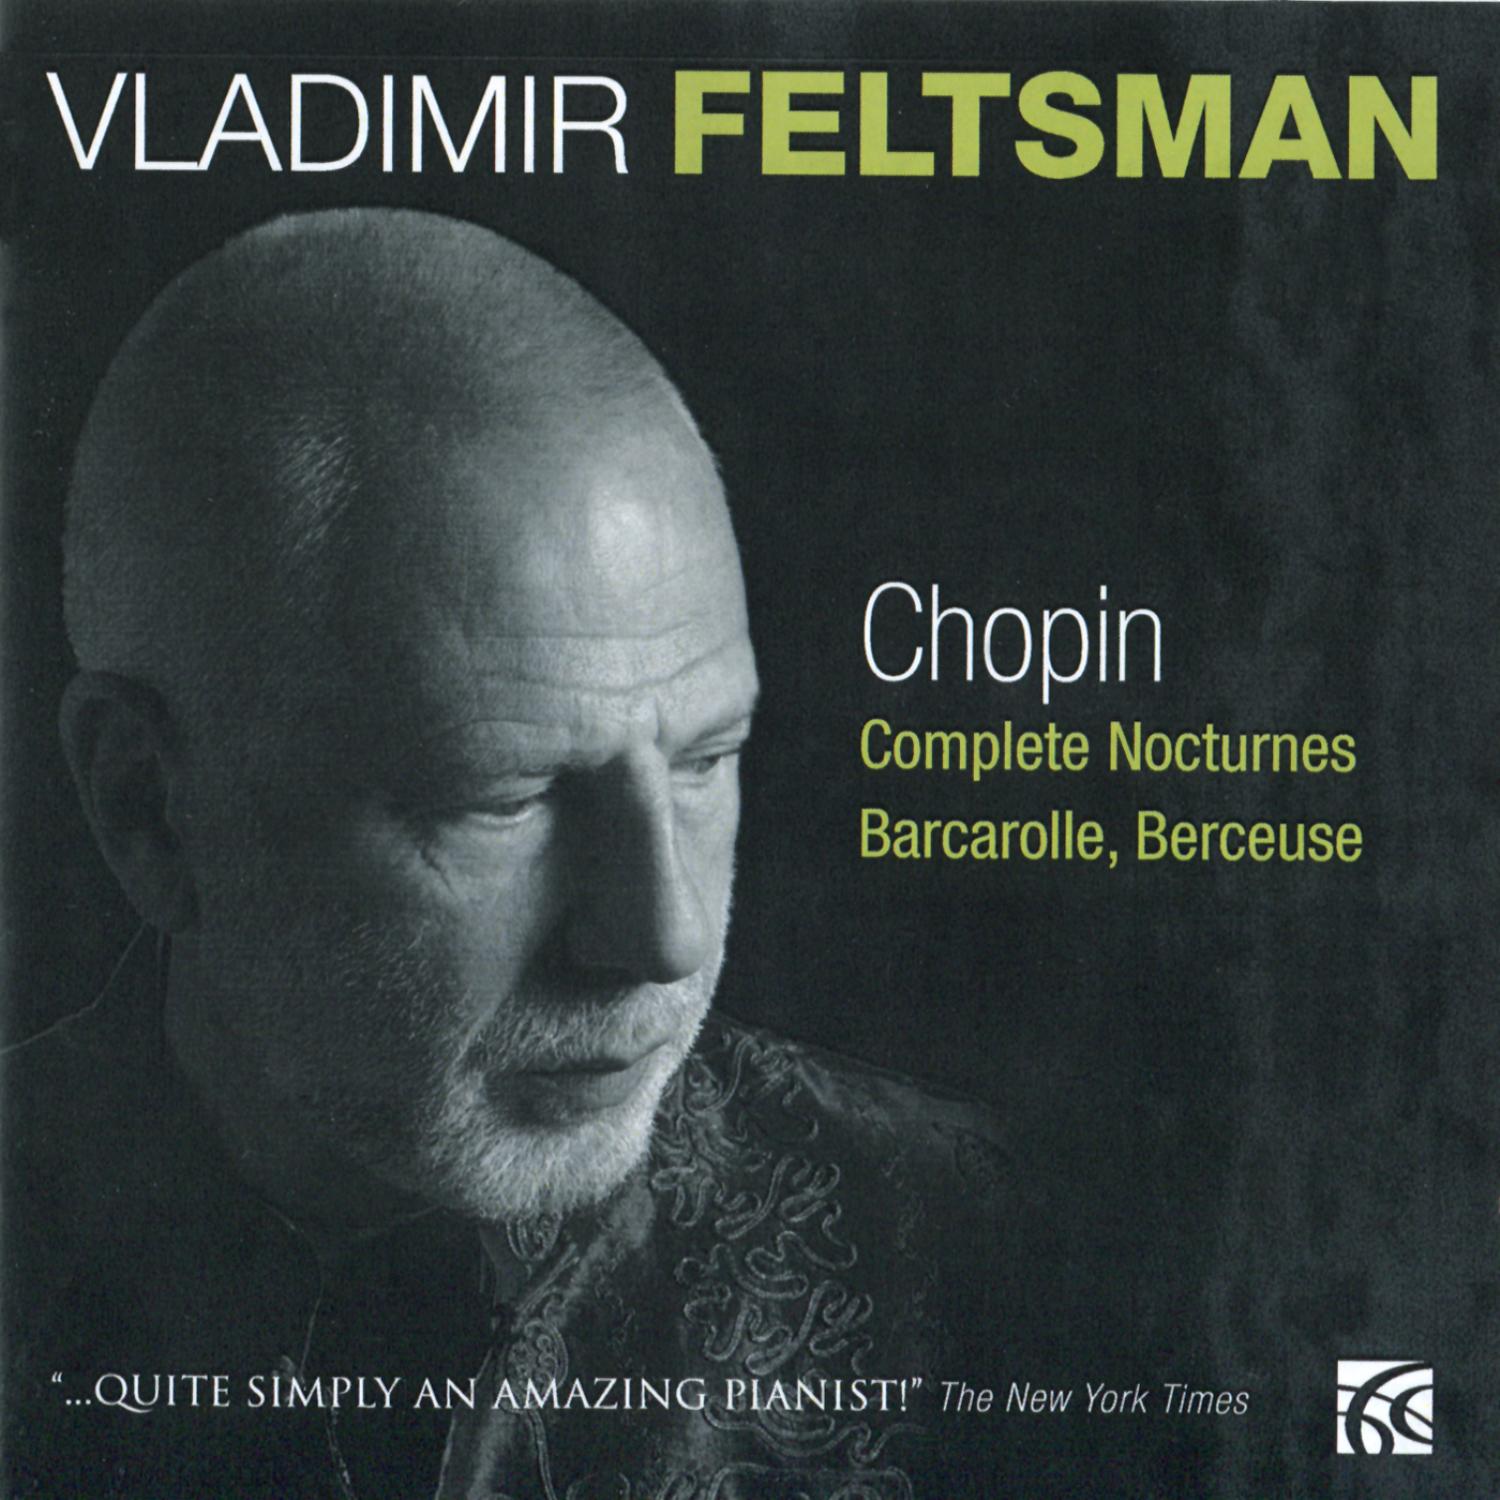 Chopin: Complete Noctures, Barcarolle, Berceuse